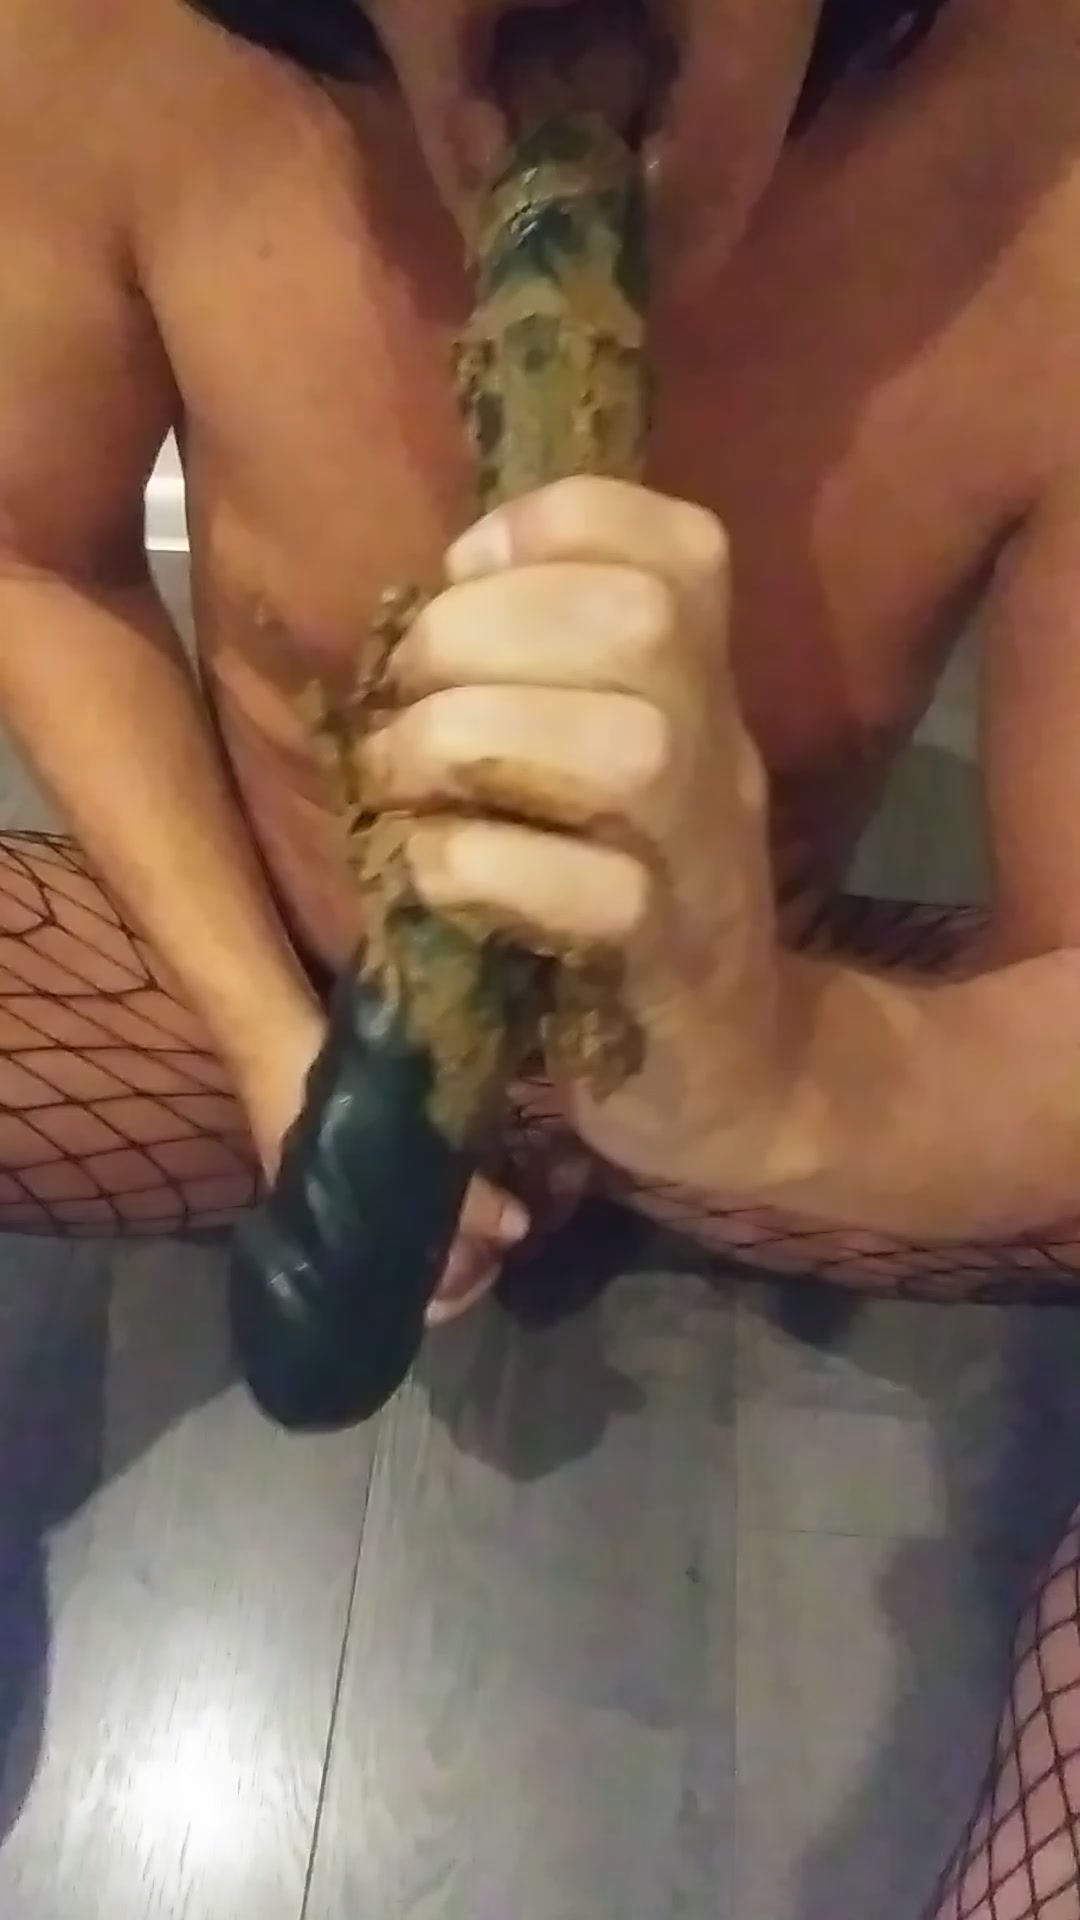 Scat and dildo playing - video 2